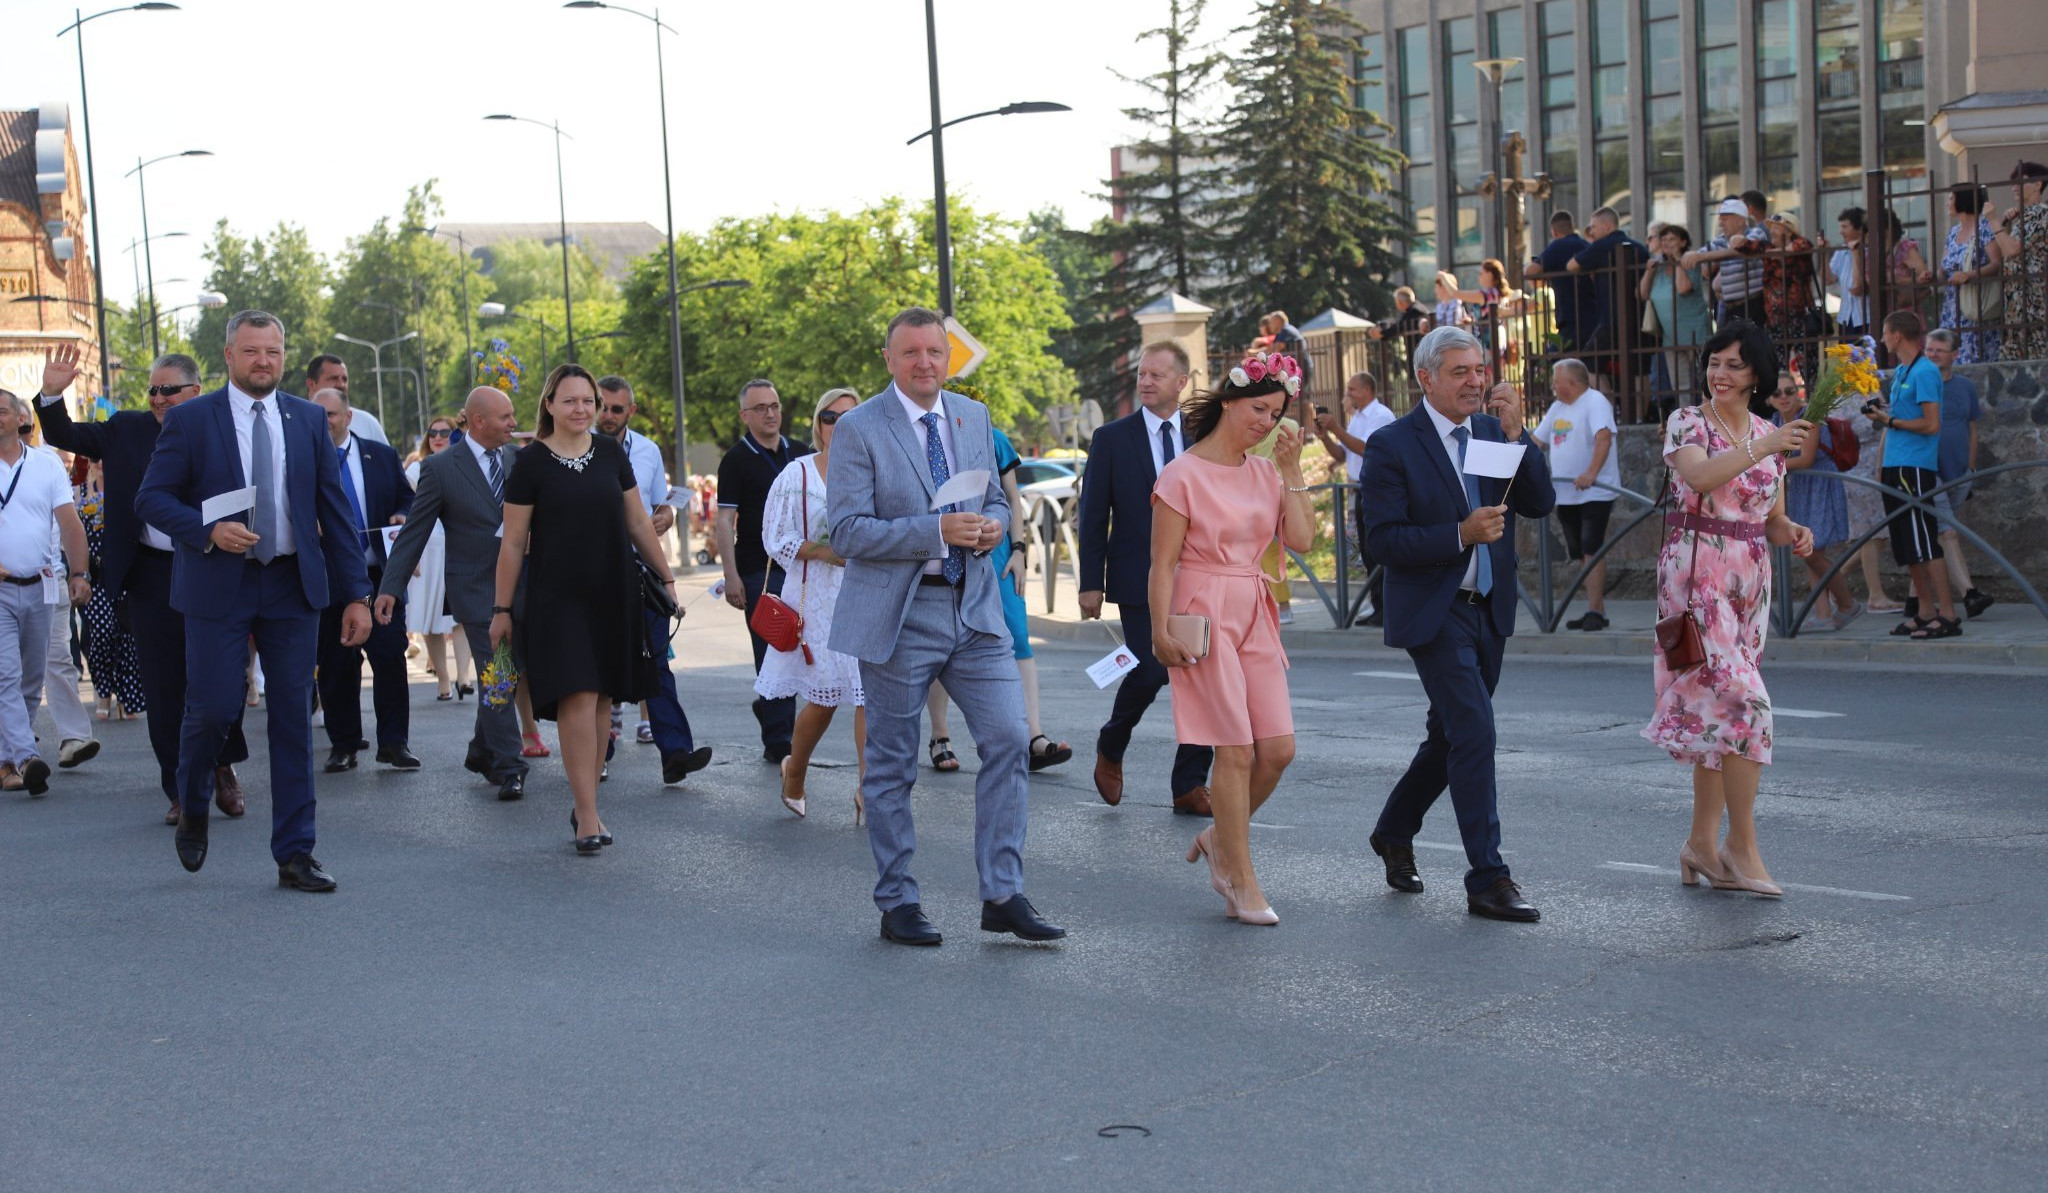 Ambassador Igityan took part in celebration of day in city of Joniškis, Lithuania